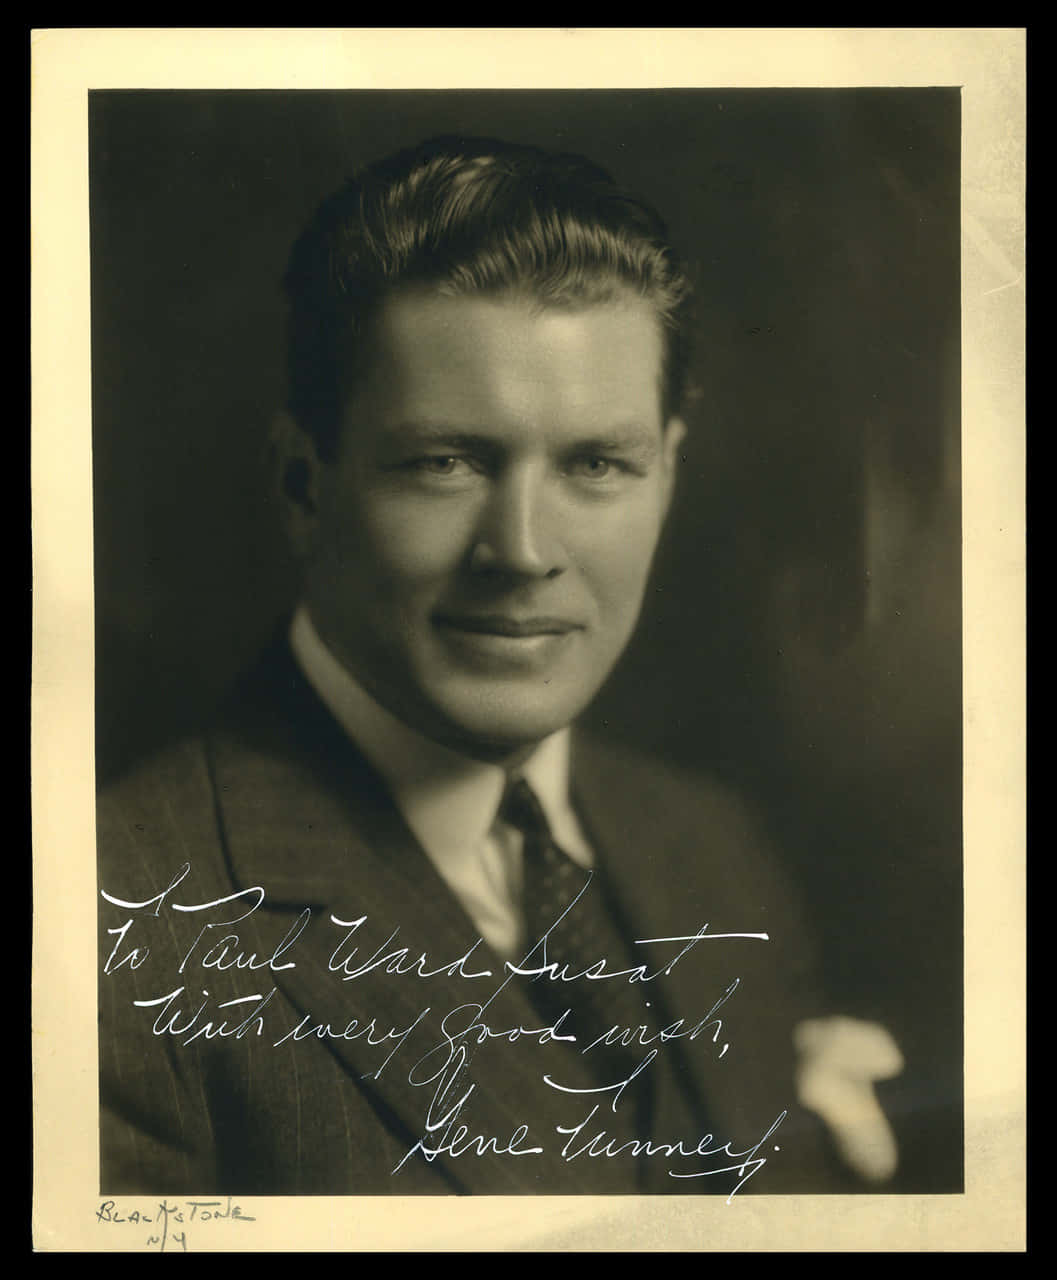 Quotes From Gene Tunney Wallpaper